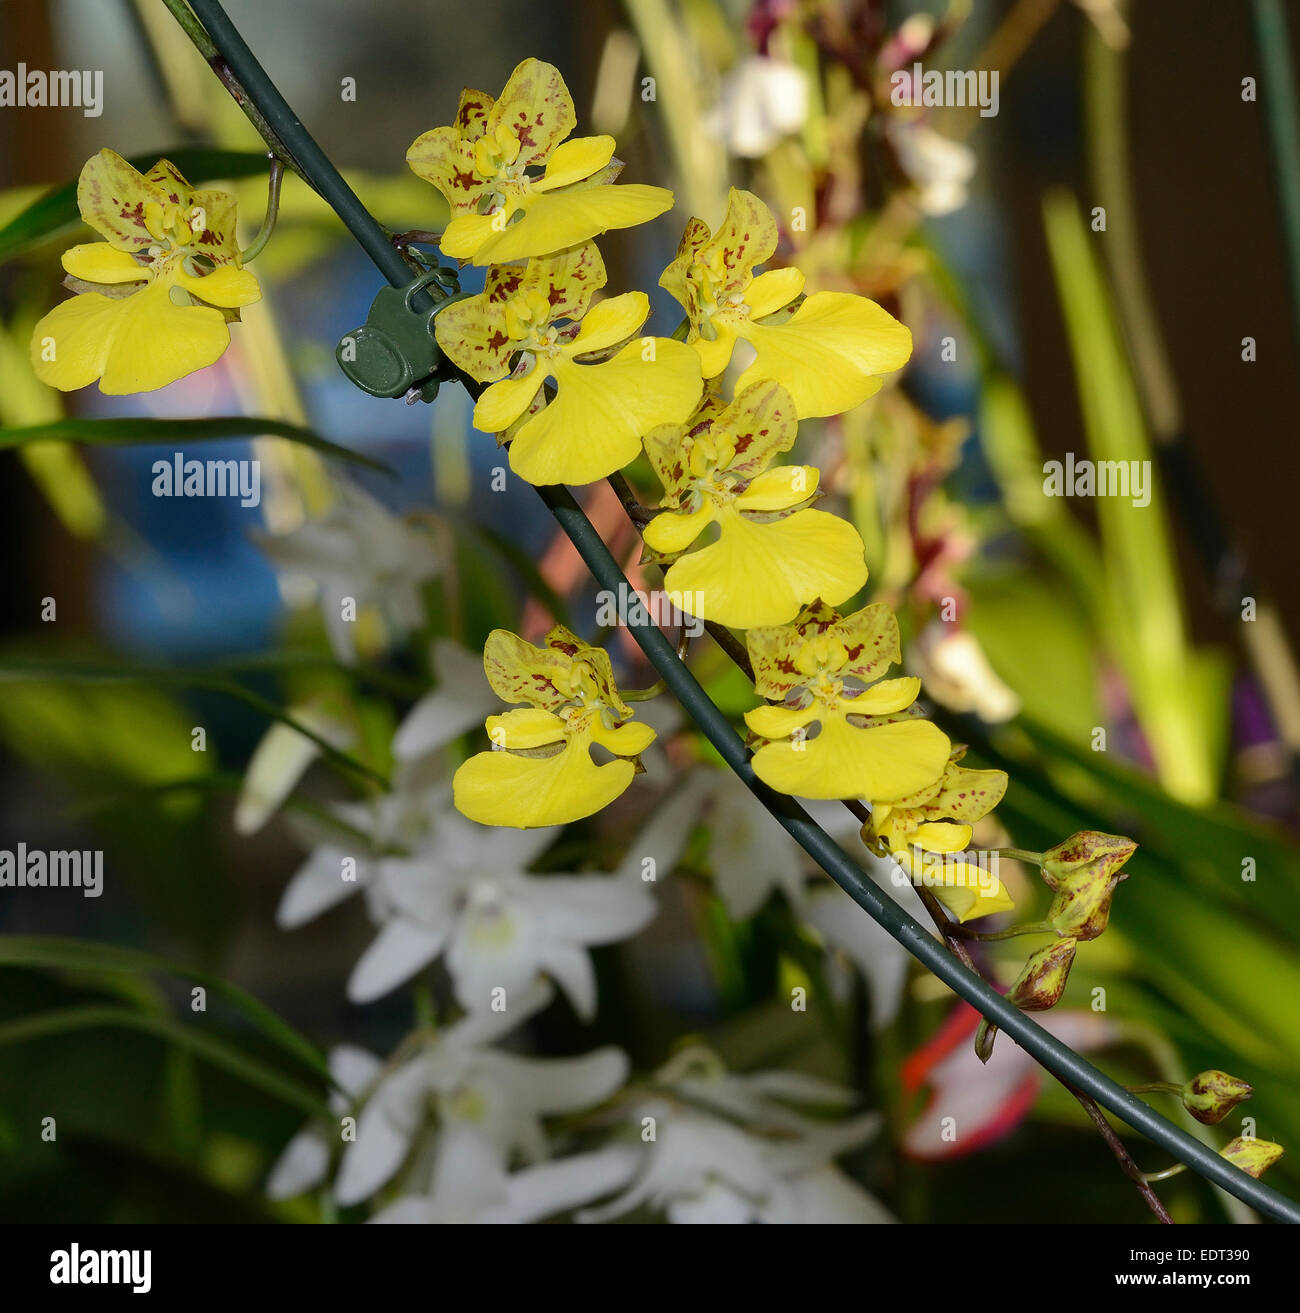 Oncidium alohi Yellow & Red Orchid Flower Stock Photo